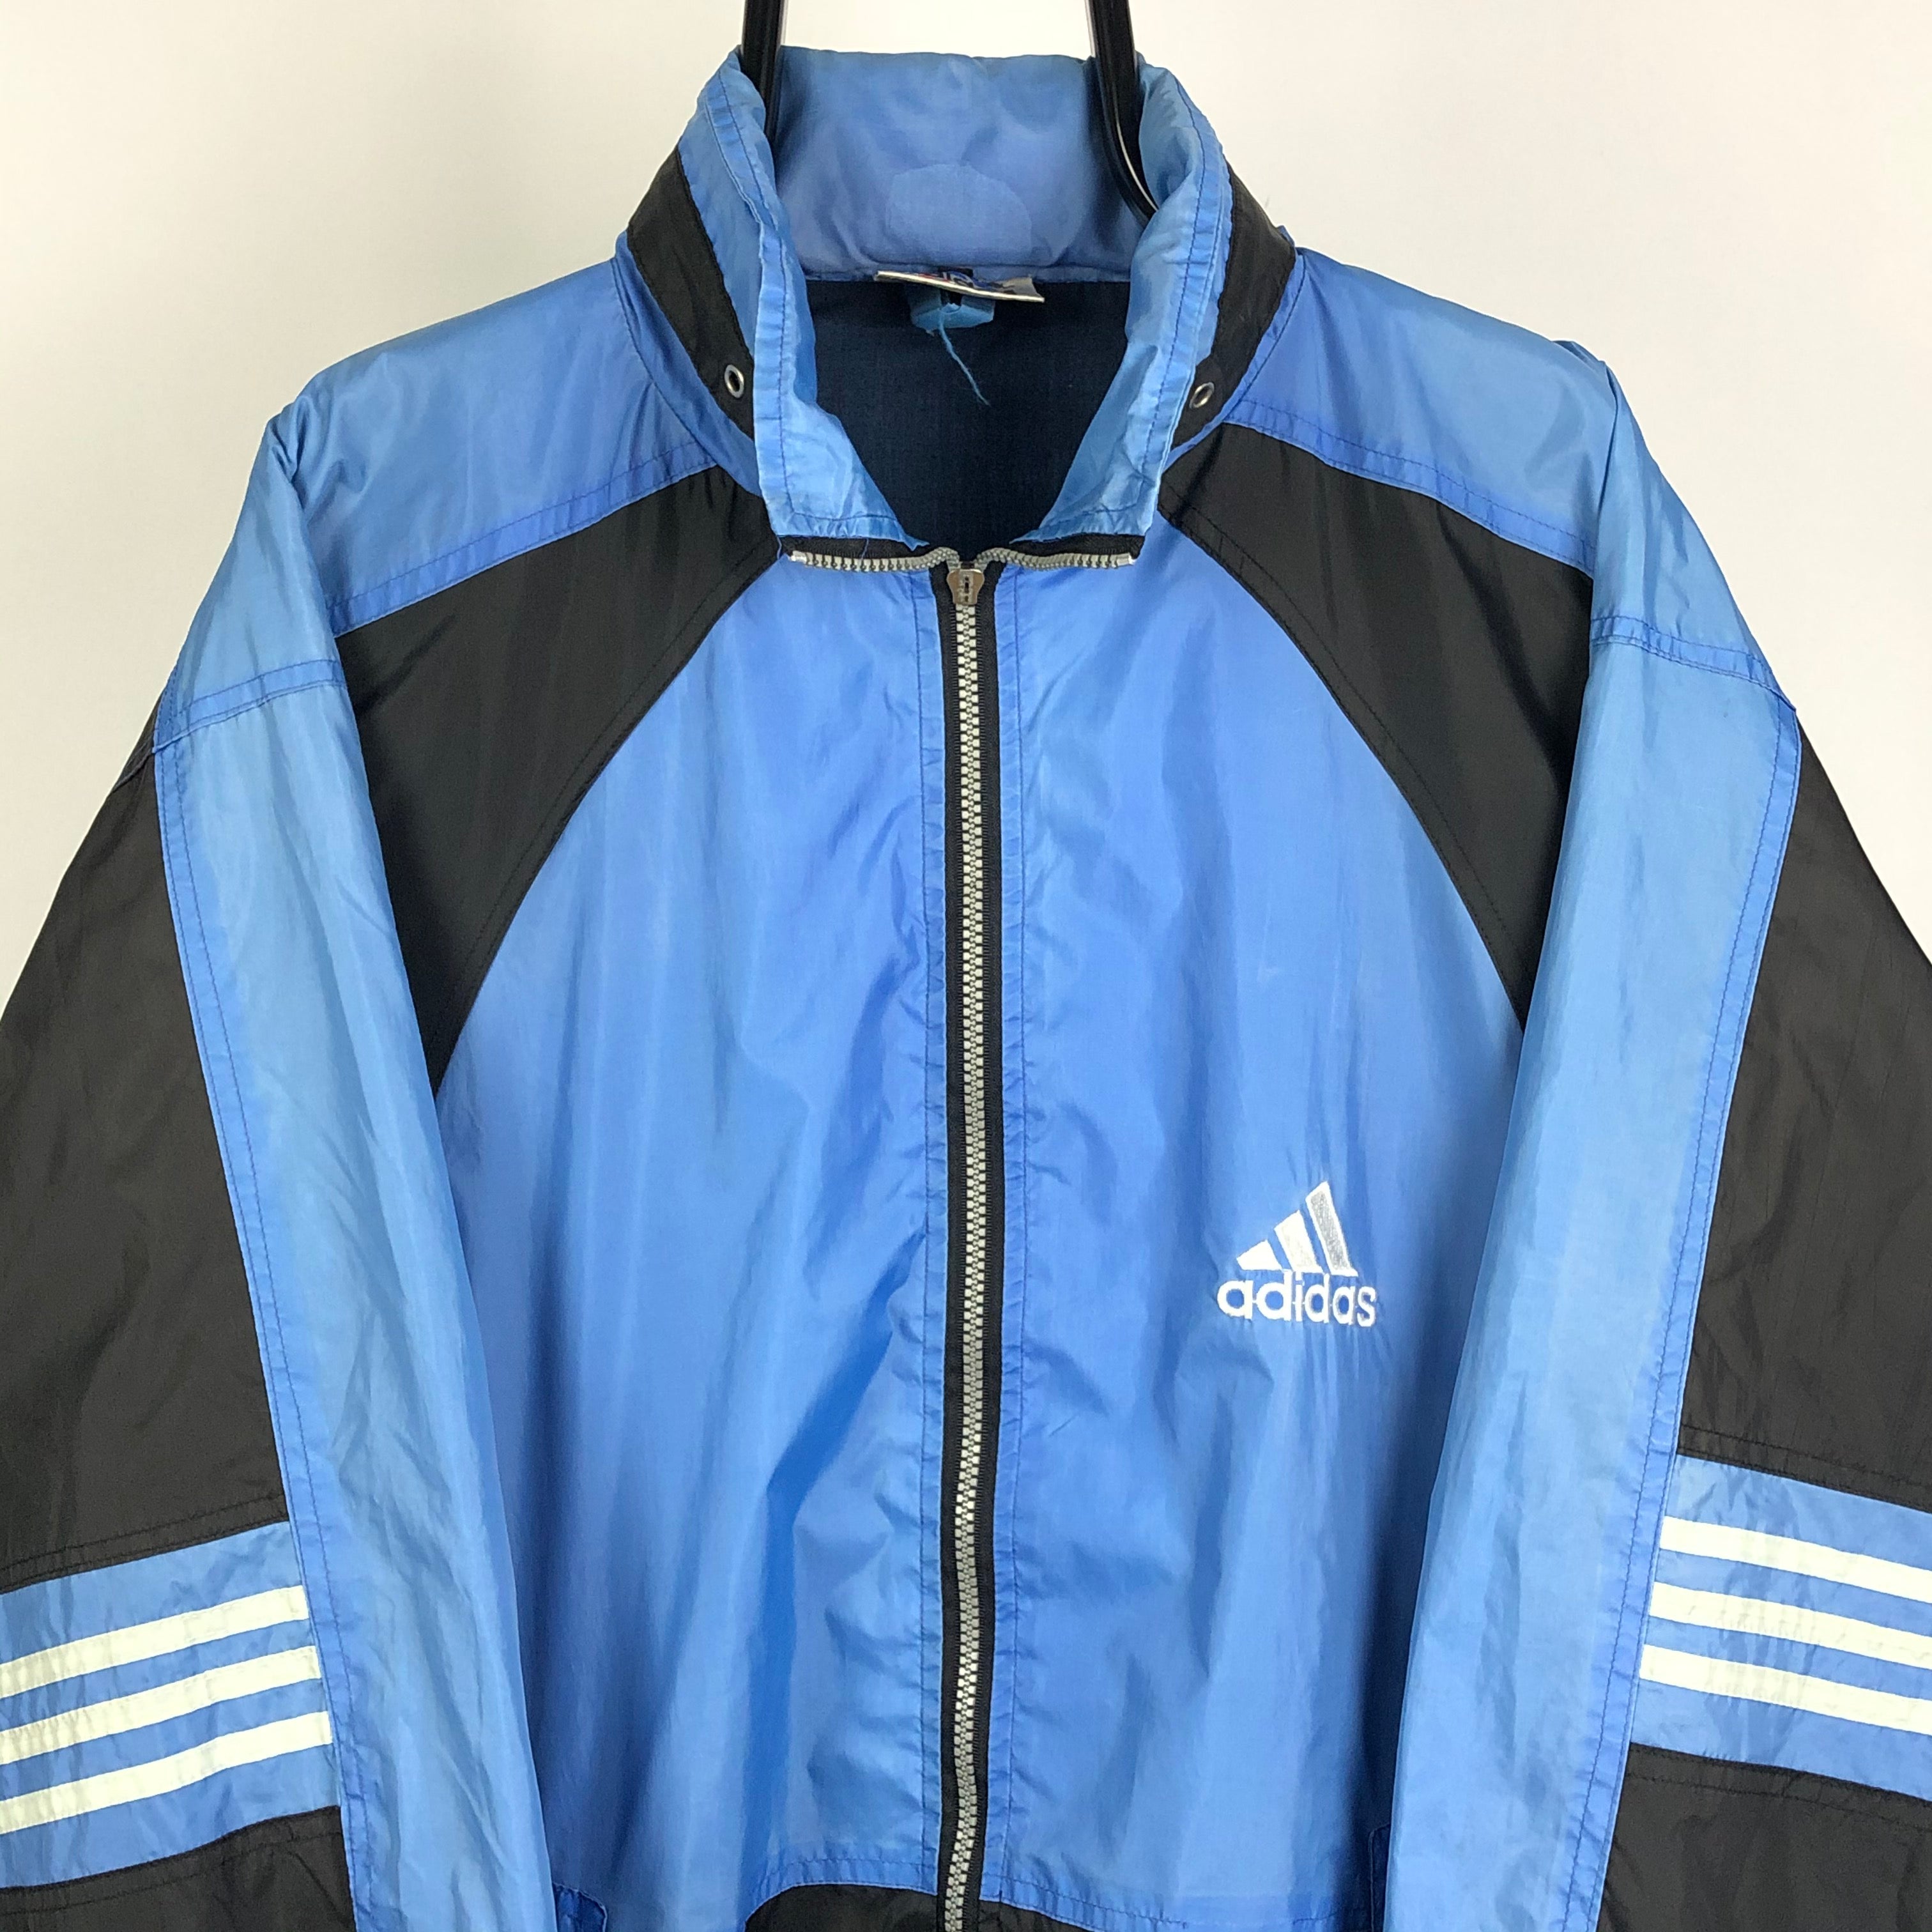 Vintage Adidas Track Jacket in Baby Blue - Men's Large/Women's XL ...